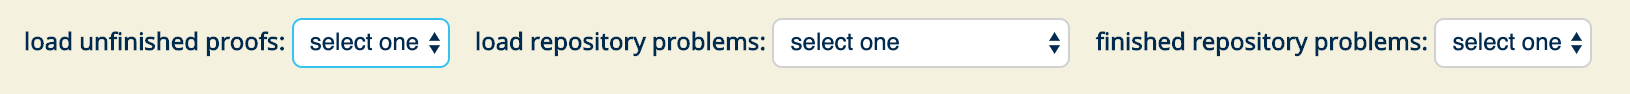 The option bar for authenticated students @ CSUMB. This allows them to load their saved proofs, load a problem that the professor assigned (from the “repository”), and see their submitted solutions. This option bar is displayed underneath the navigation bar.